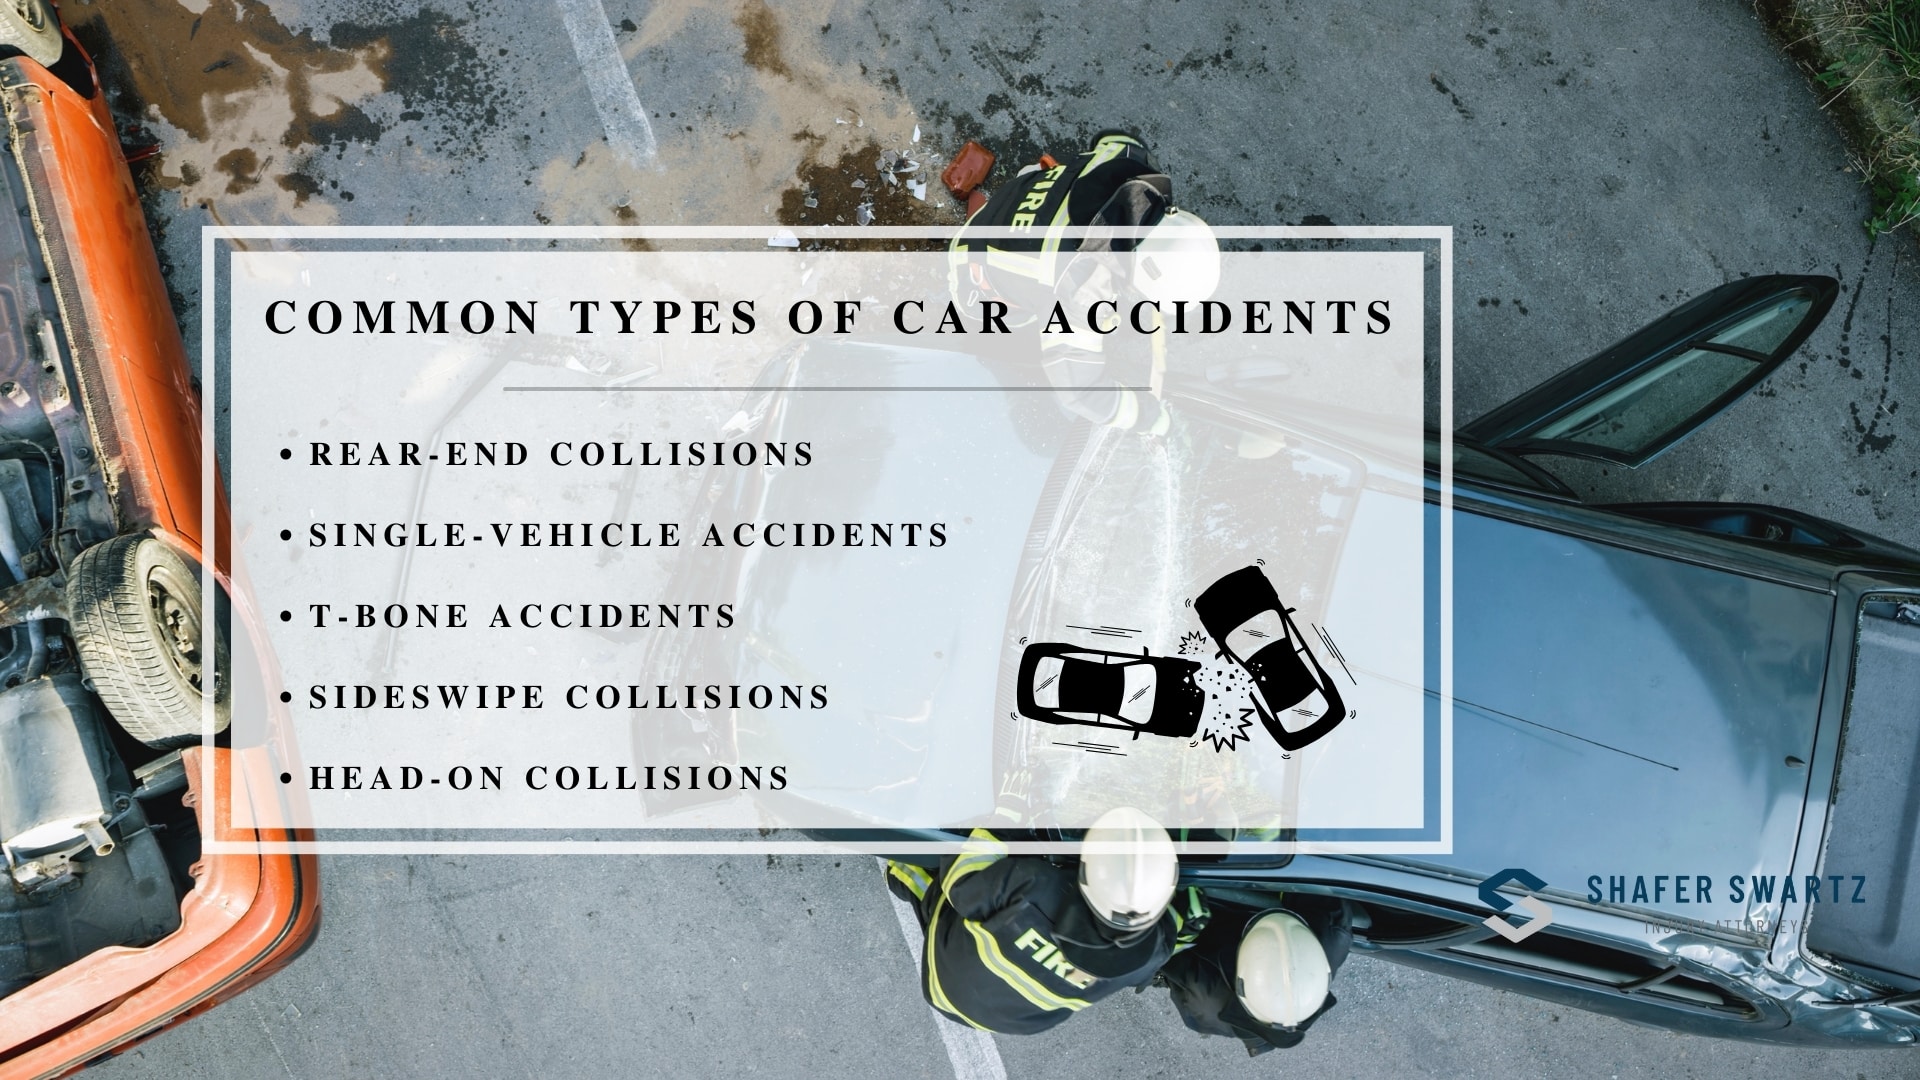 Infographic image of common types of car accidents